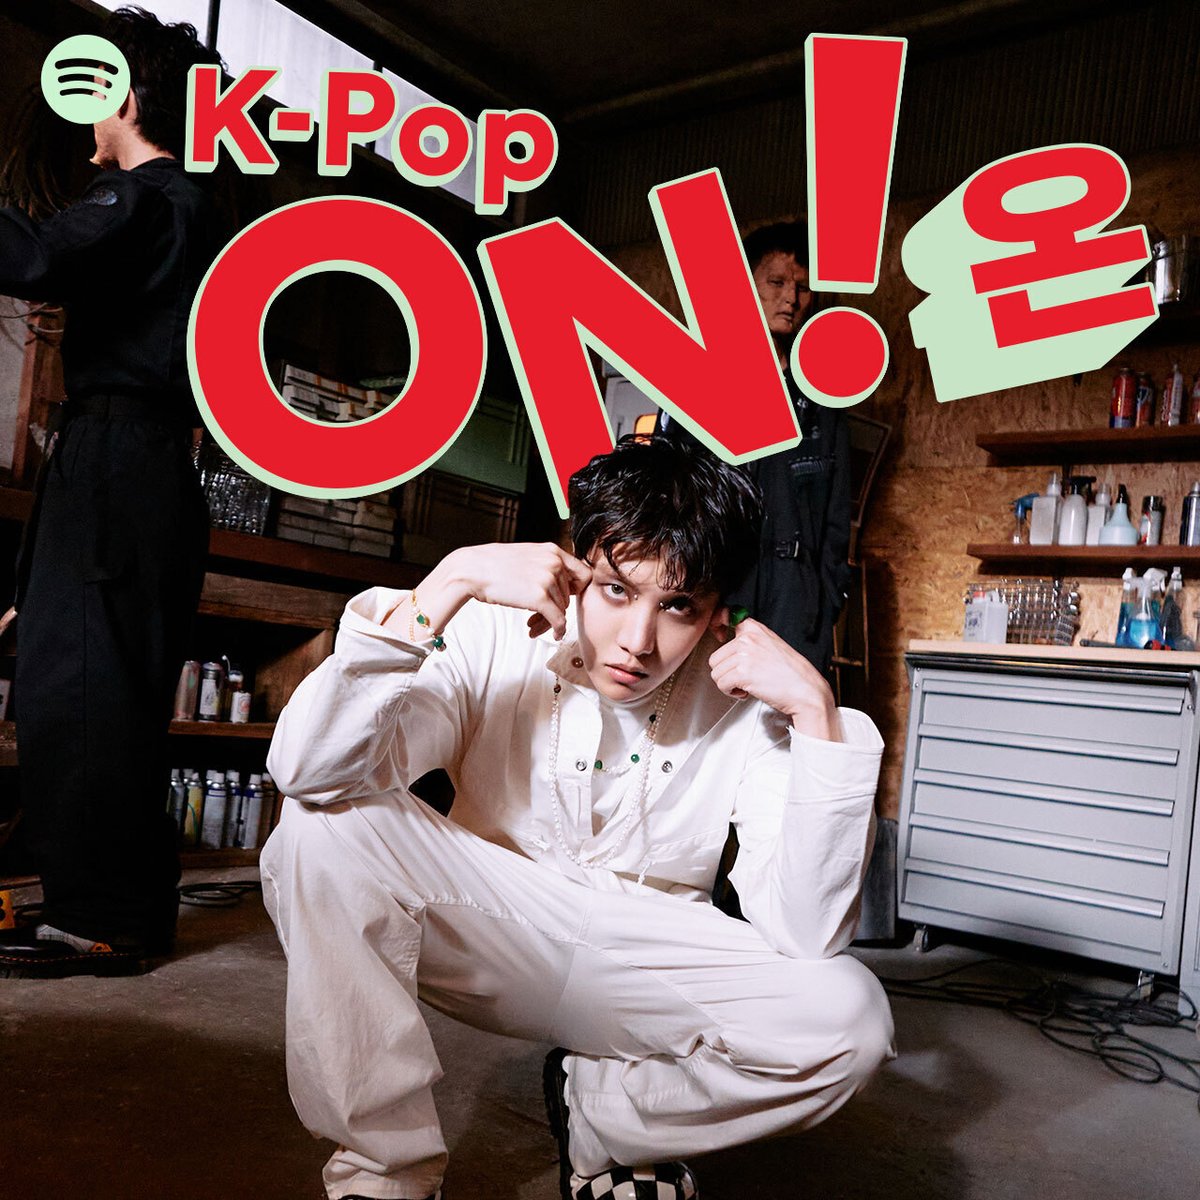 Thank you @SpotifyKpop & @SpotifyKR! Check out 'MORE' on Spotify here 👉 open.spotify.com/playlist/37i9d… #jhope #제이홉 #jhope_MORE